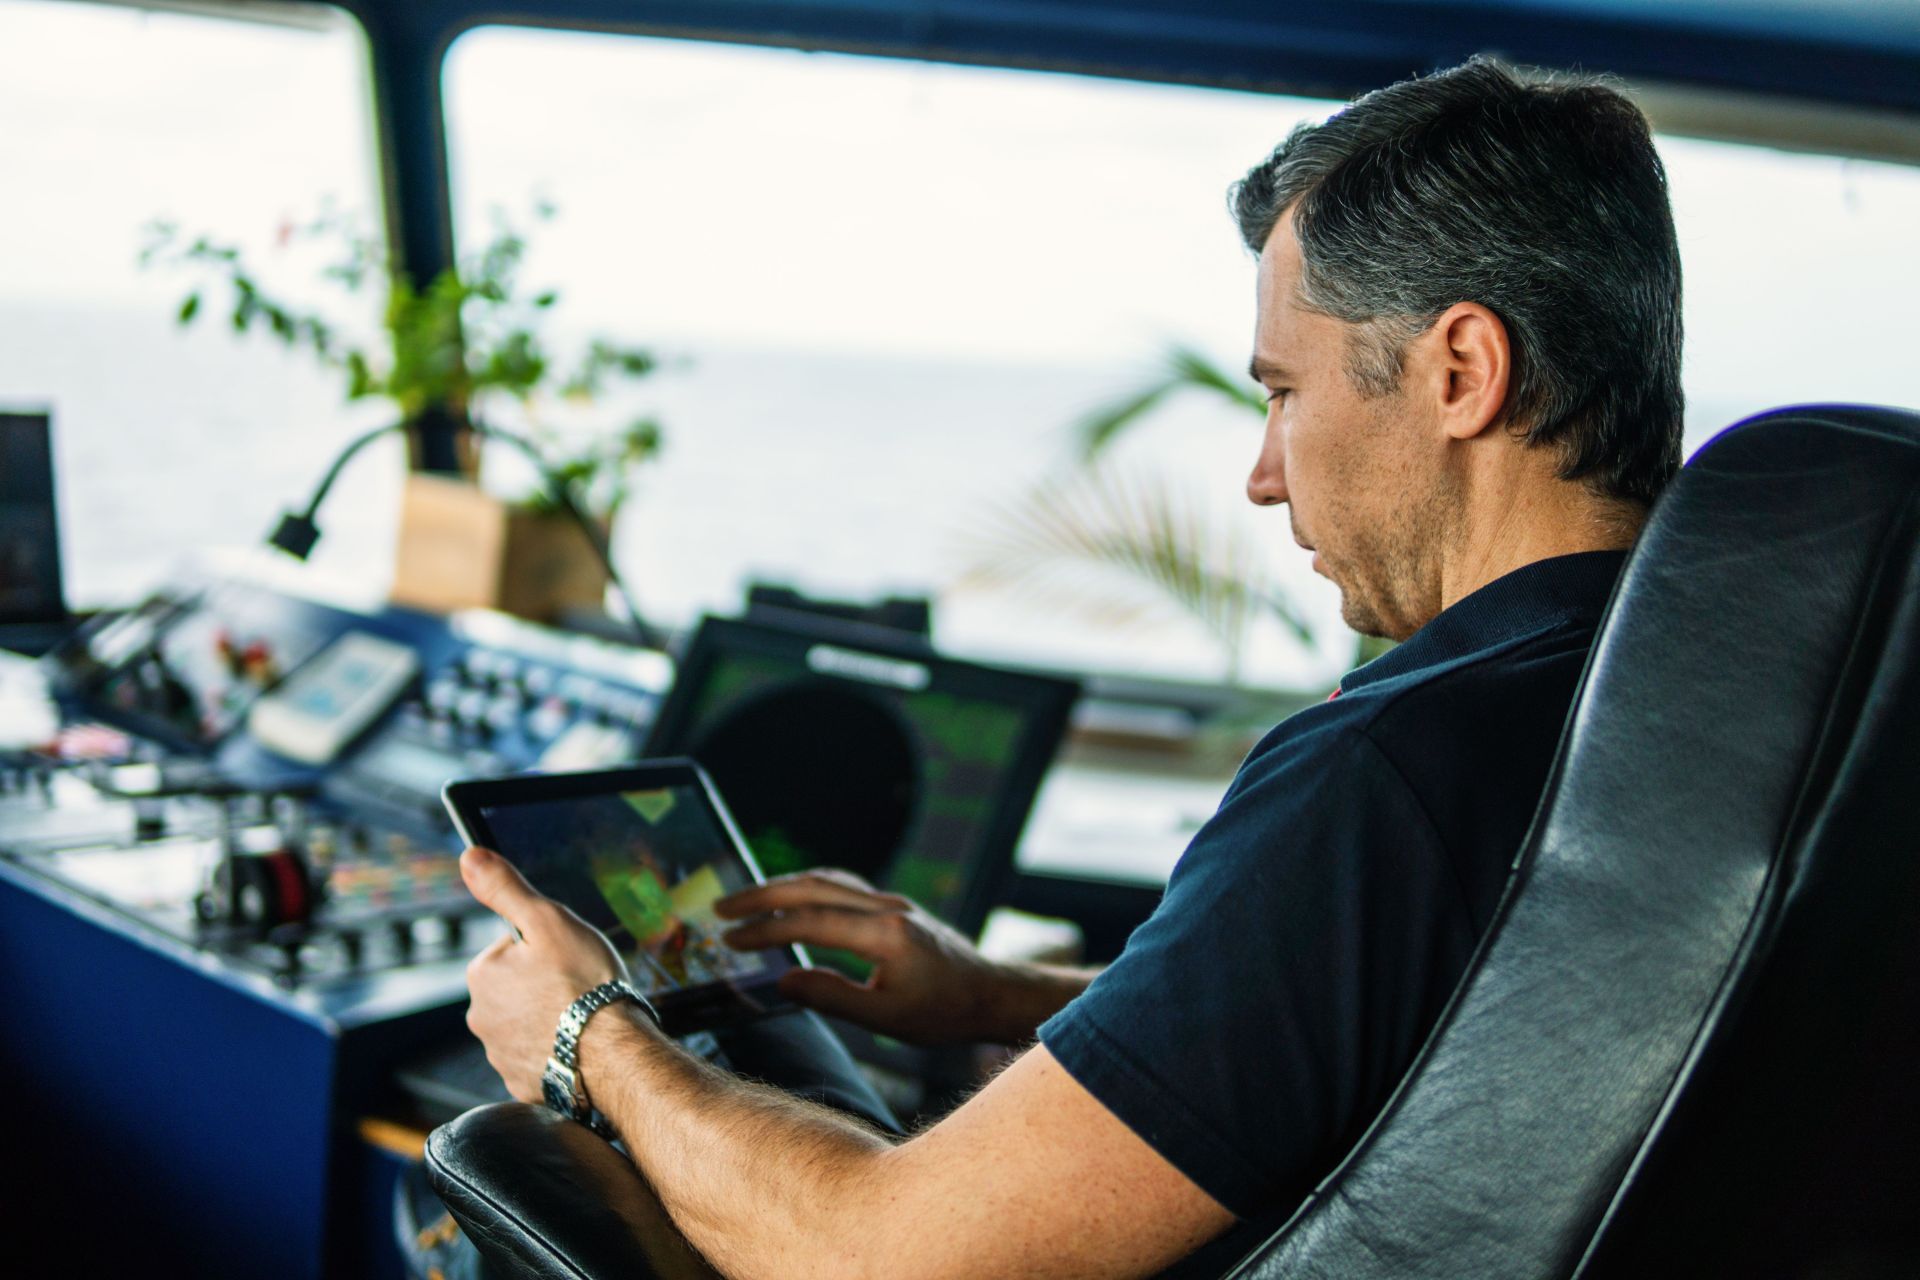 Experienced maritime navigator using a digital tablet in the ship's control room with ocean views.